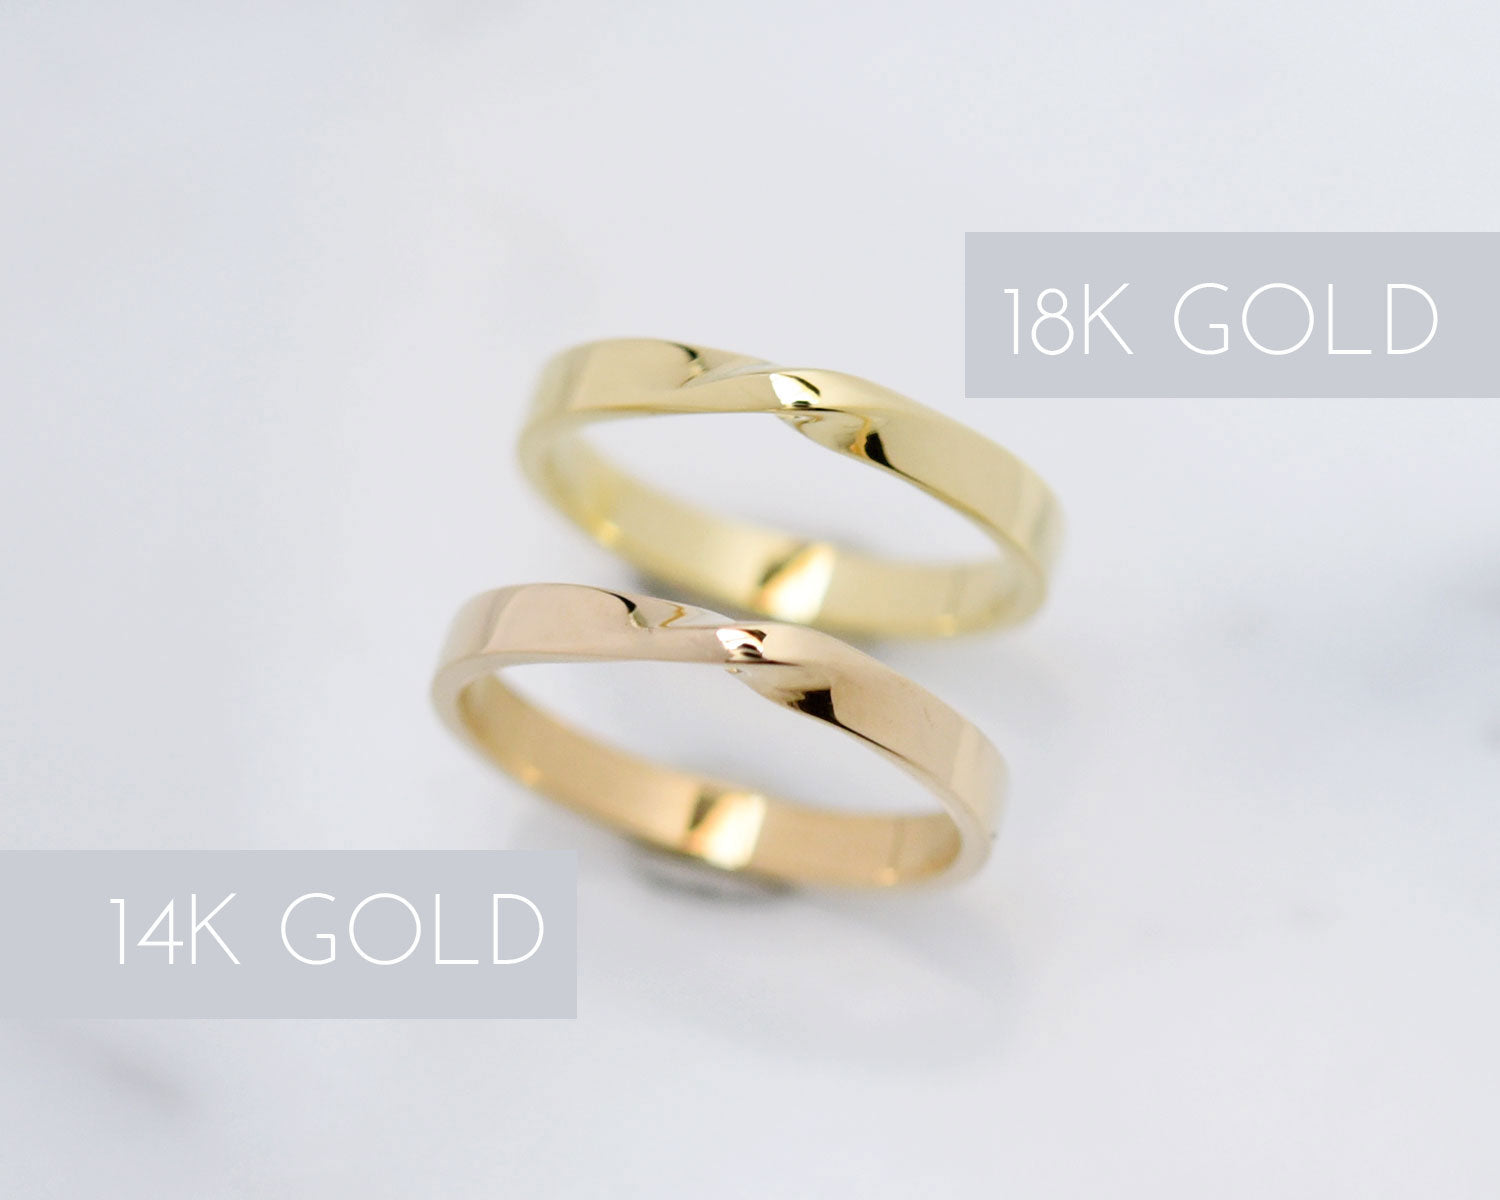 over there barbecue strong 14k solid yellow gold meaning three How nice ...